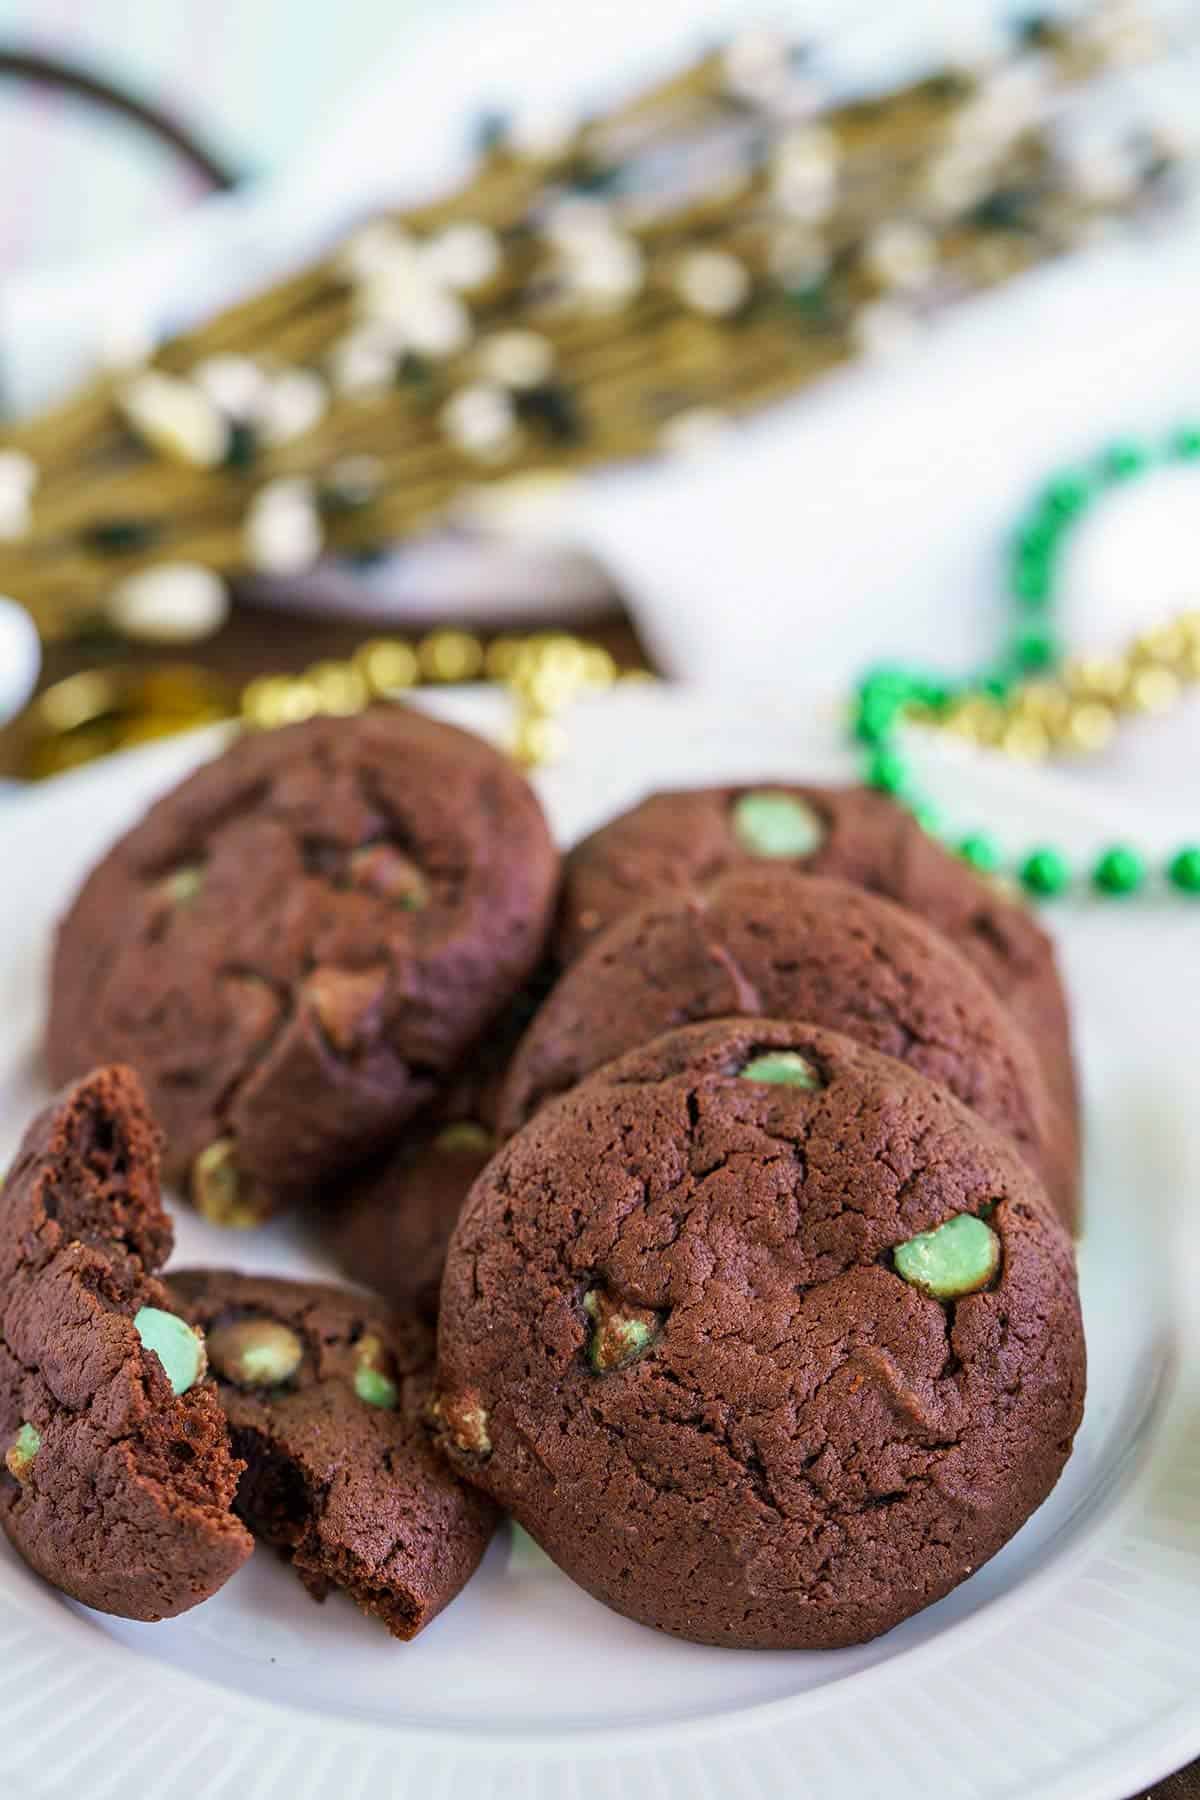 Finished chocolate mint cream cheese cookies on a plate.